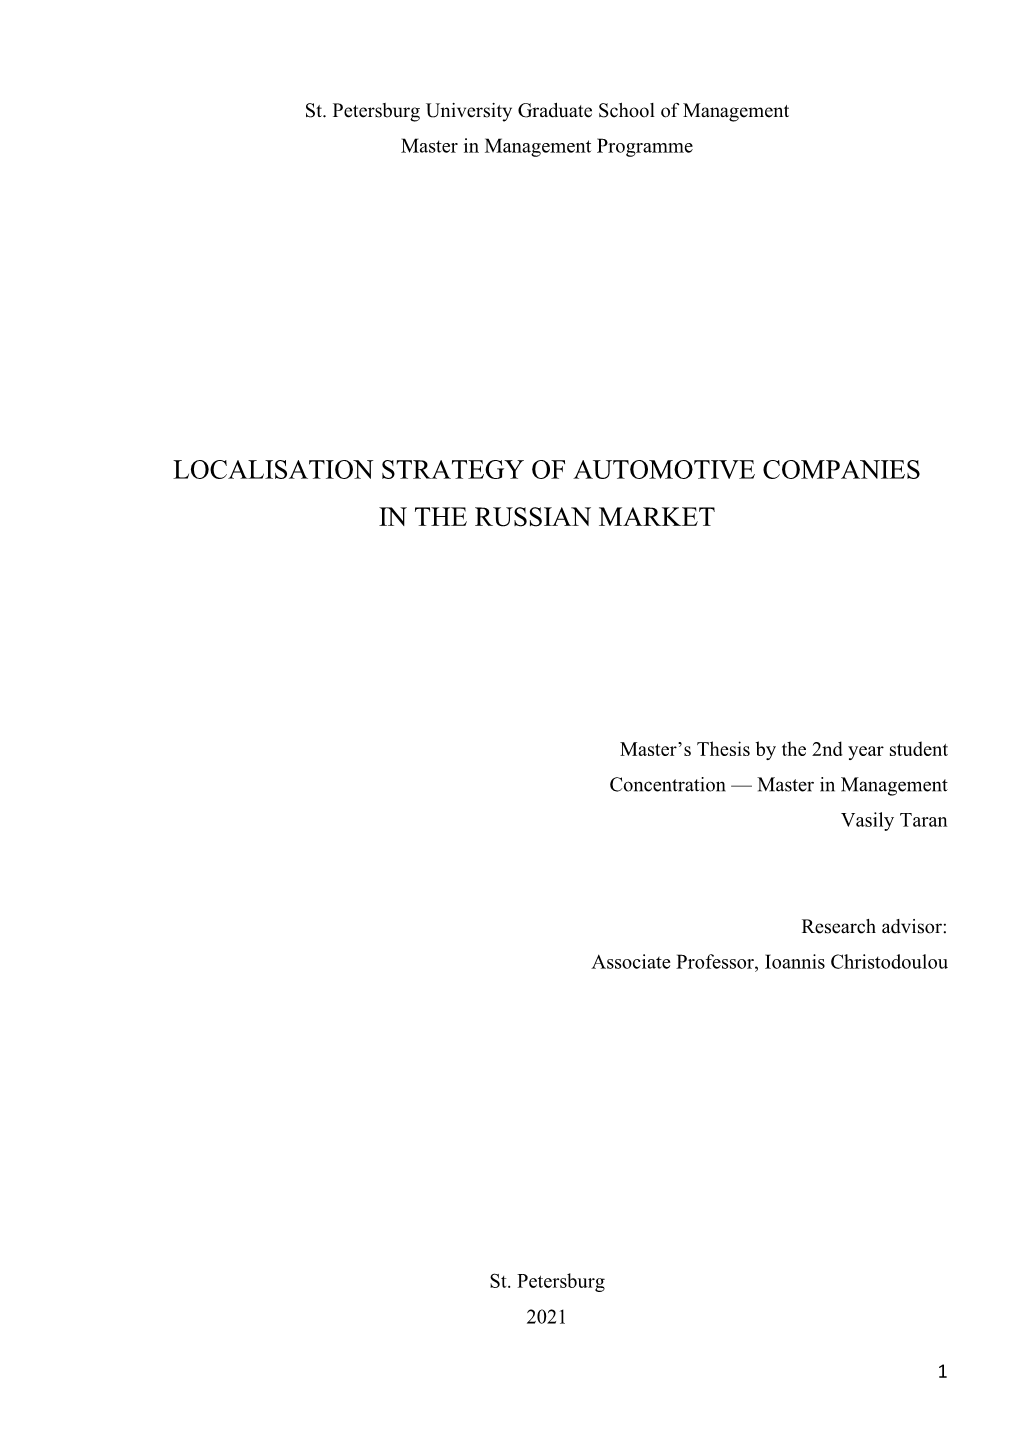 Localisation Strategy of Automotive Companies in the Russian Market